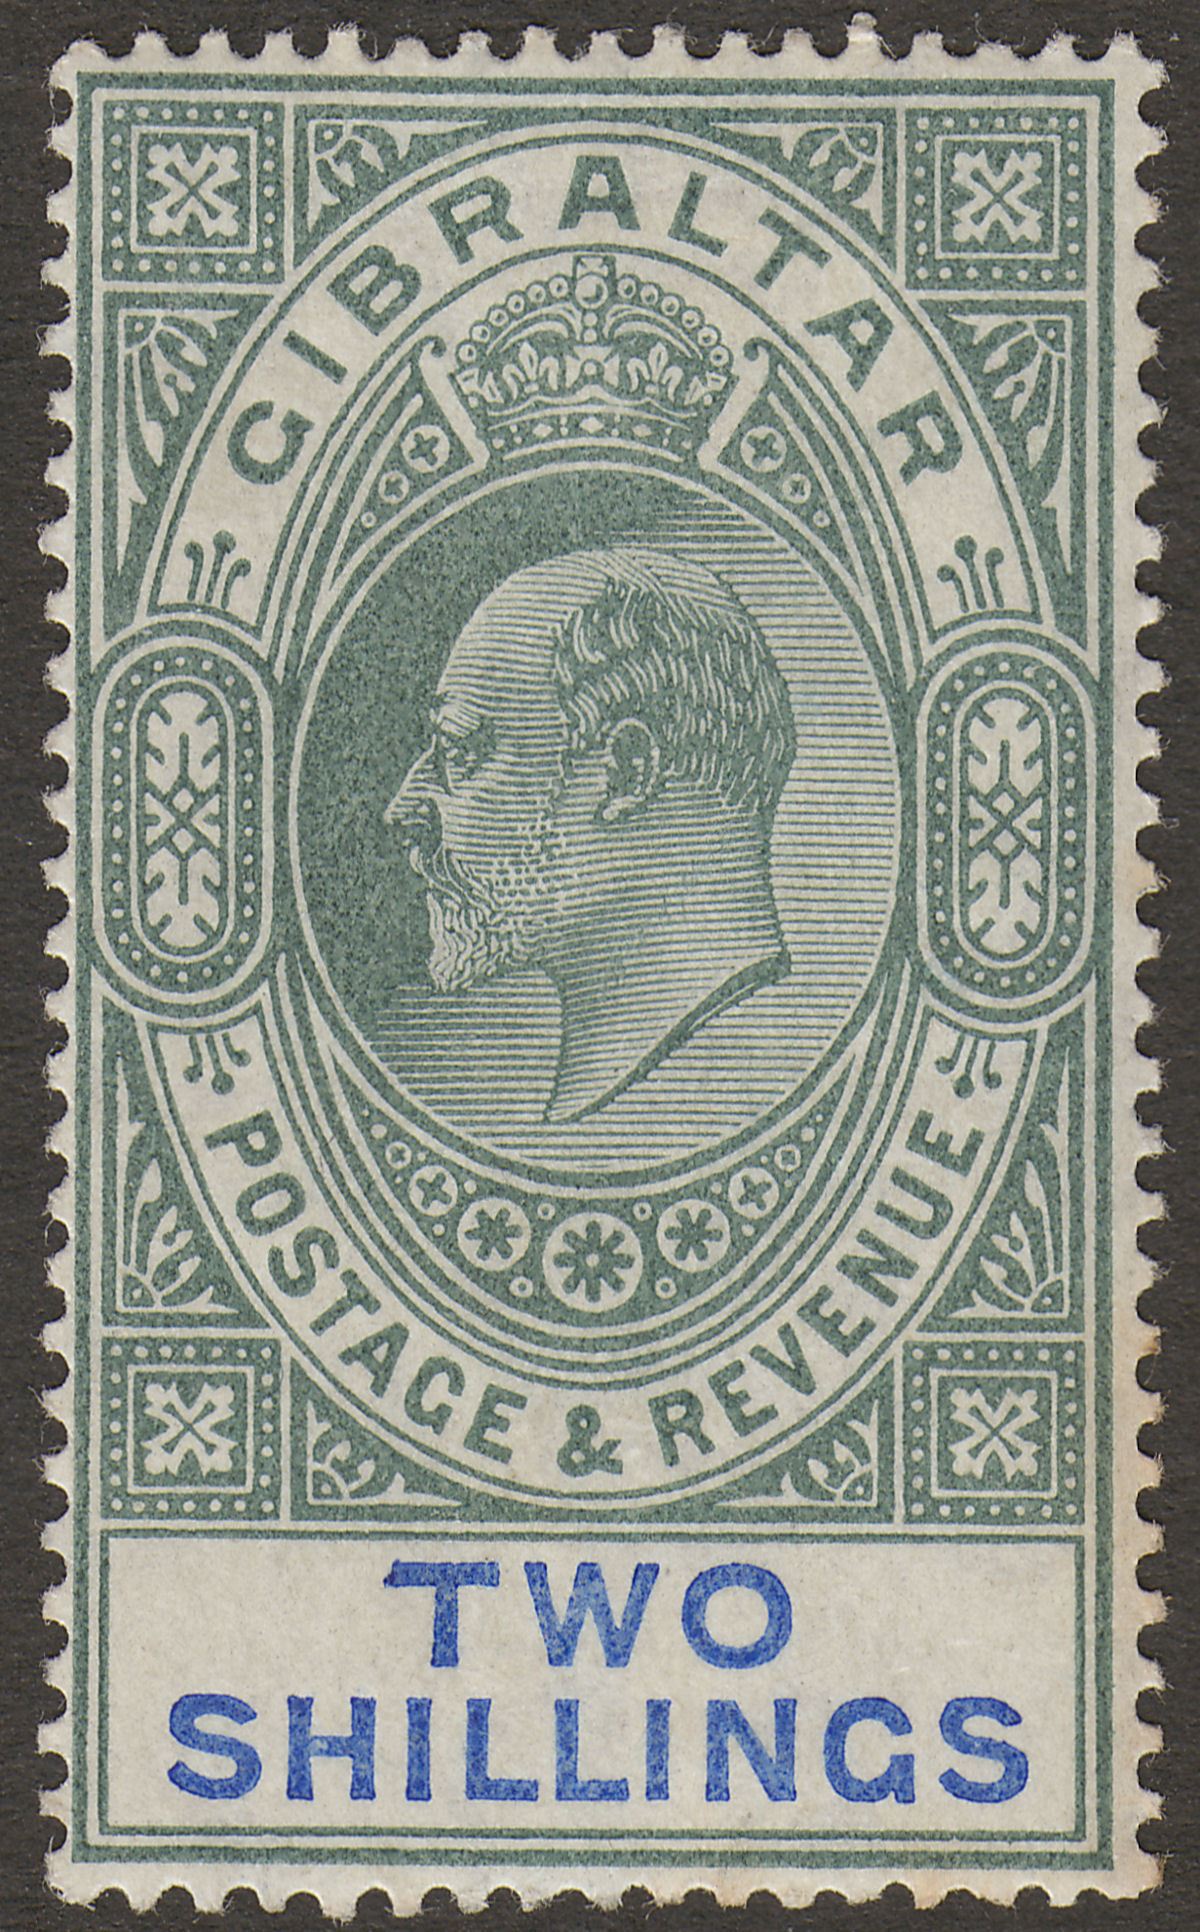 Gibraltar 1907 KEVII 2sh Green and Blue Chalky Mint SG62a cat £120 with tones